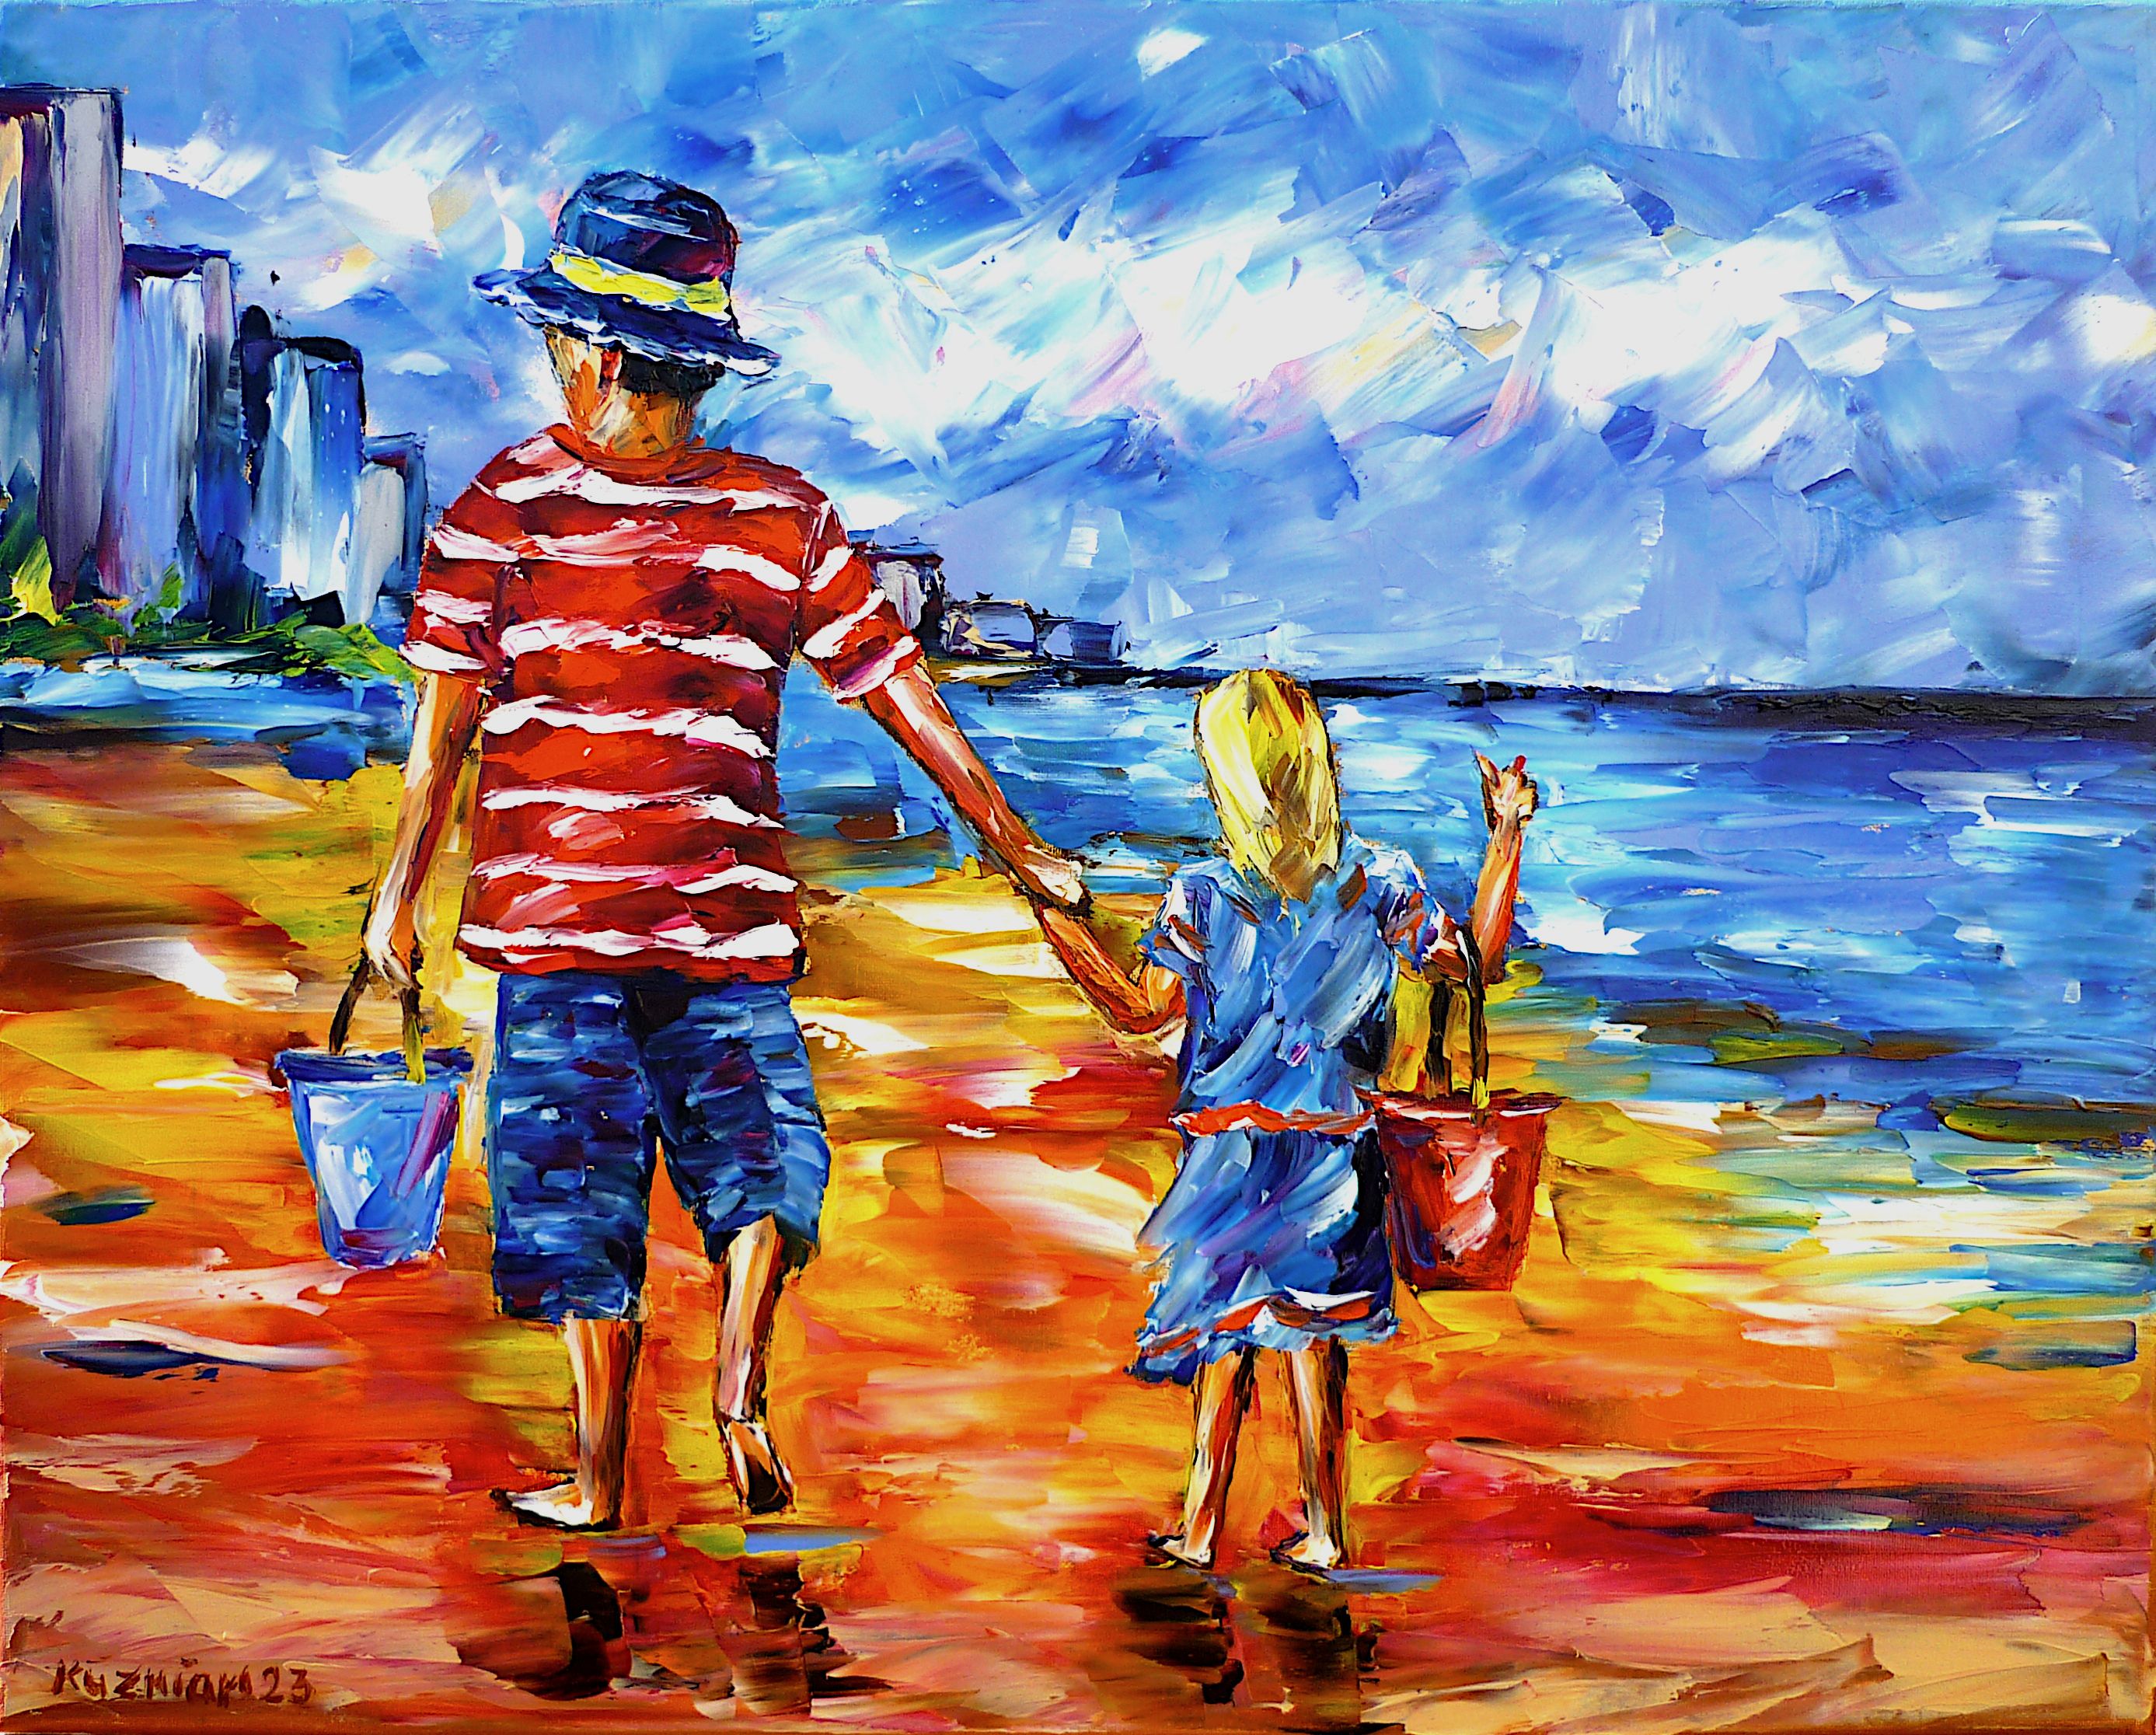 Children on the beach,children by the sea,big brother,little sister,siblings,children holding hands,walking hand in hand,beach scene,playing on the beach,children by the water,playing children,children life,children love,sister and brother,summer painting,children with plastic buckets,sibling love,brotherly love,great protector,great watchdog,walking on the beach,boy with hat,collecting shells,looking for shells,happiness,happy life,peaceful,children time,children days,children painting,red beach,children in summer,summer time,summer feelings,palette knife oil painting,modern art,figurative art,figurative painting,contemporary painting,abstract painting,lively colors,colorful painting,bright colors,impasto painting